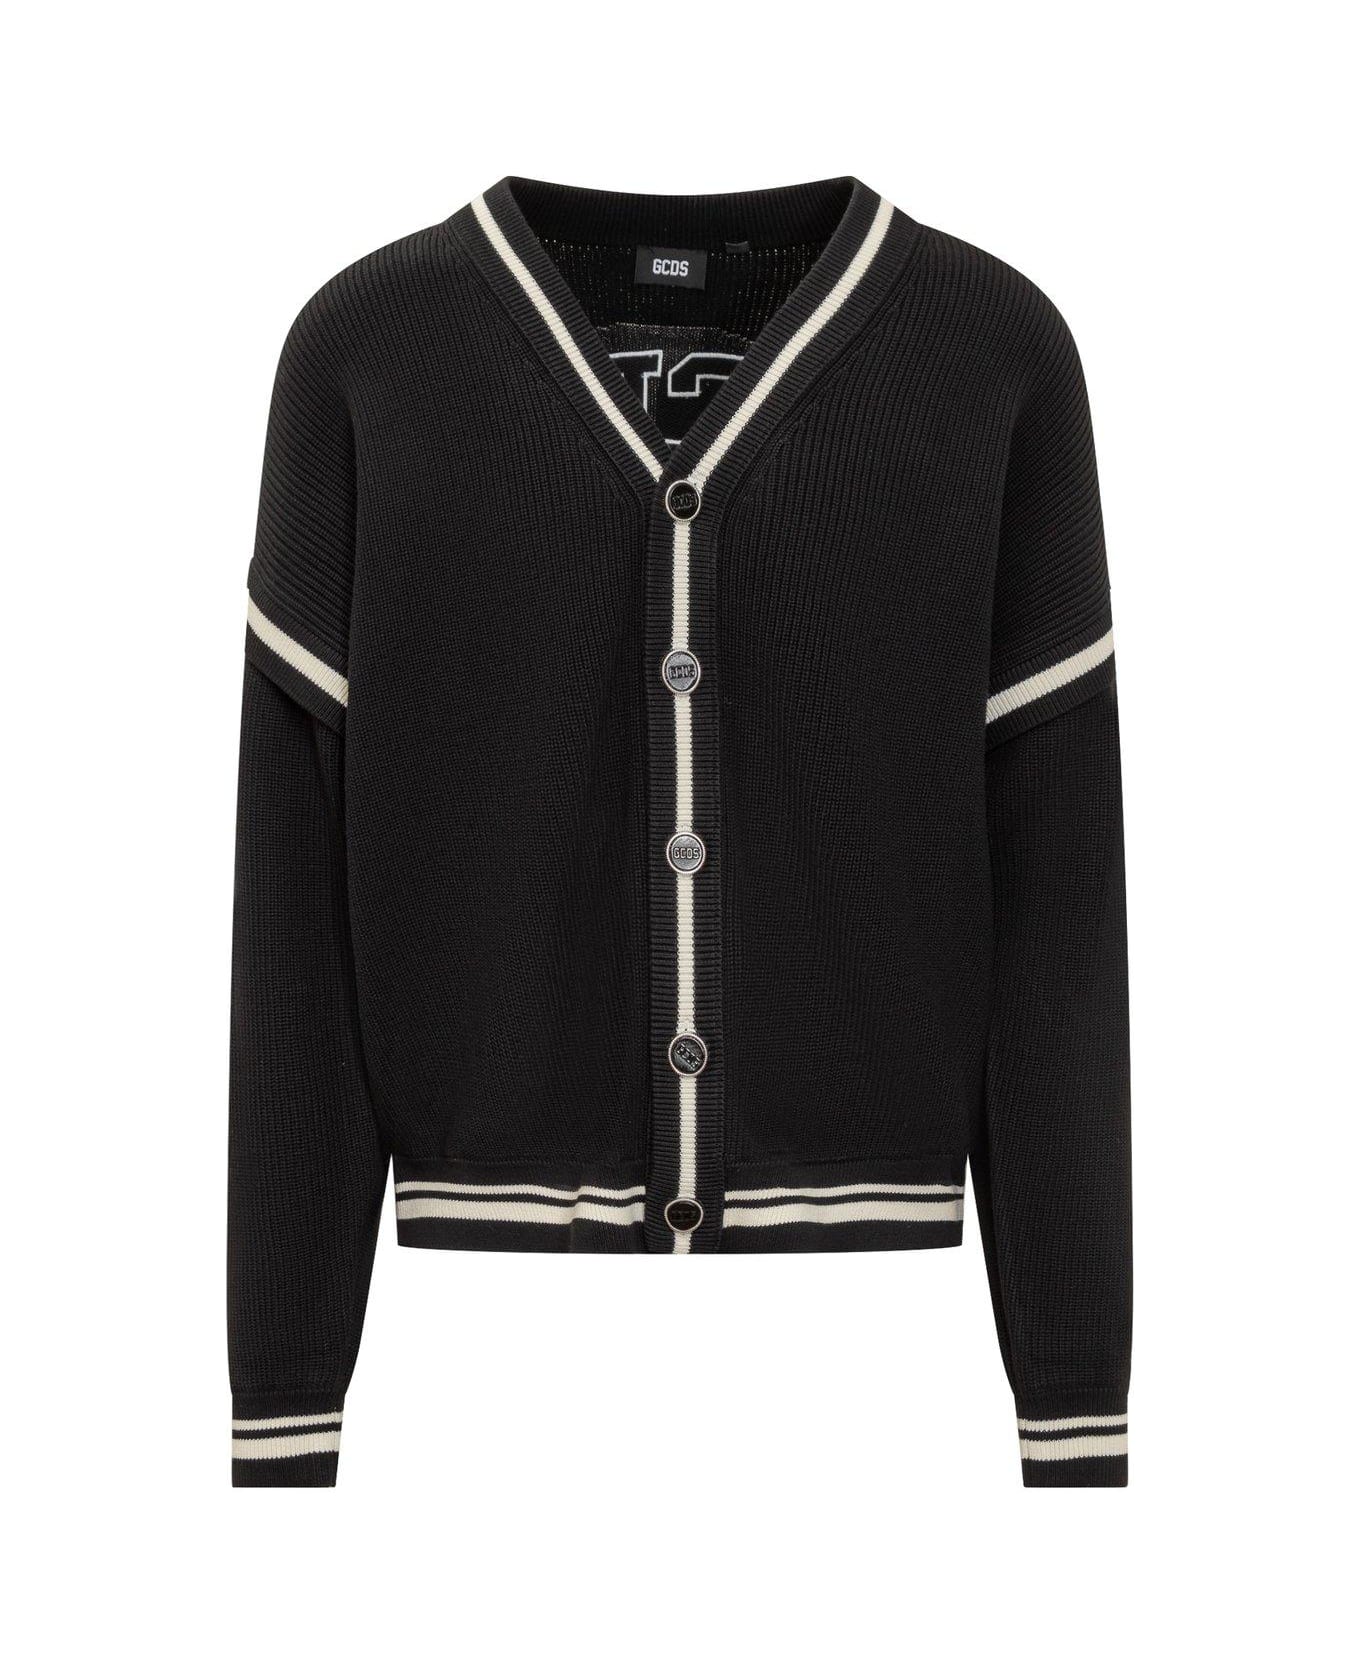 GCDS Logo Embroidered Knitted Cardigan - Nero カーディガン